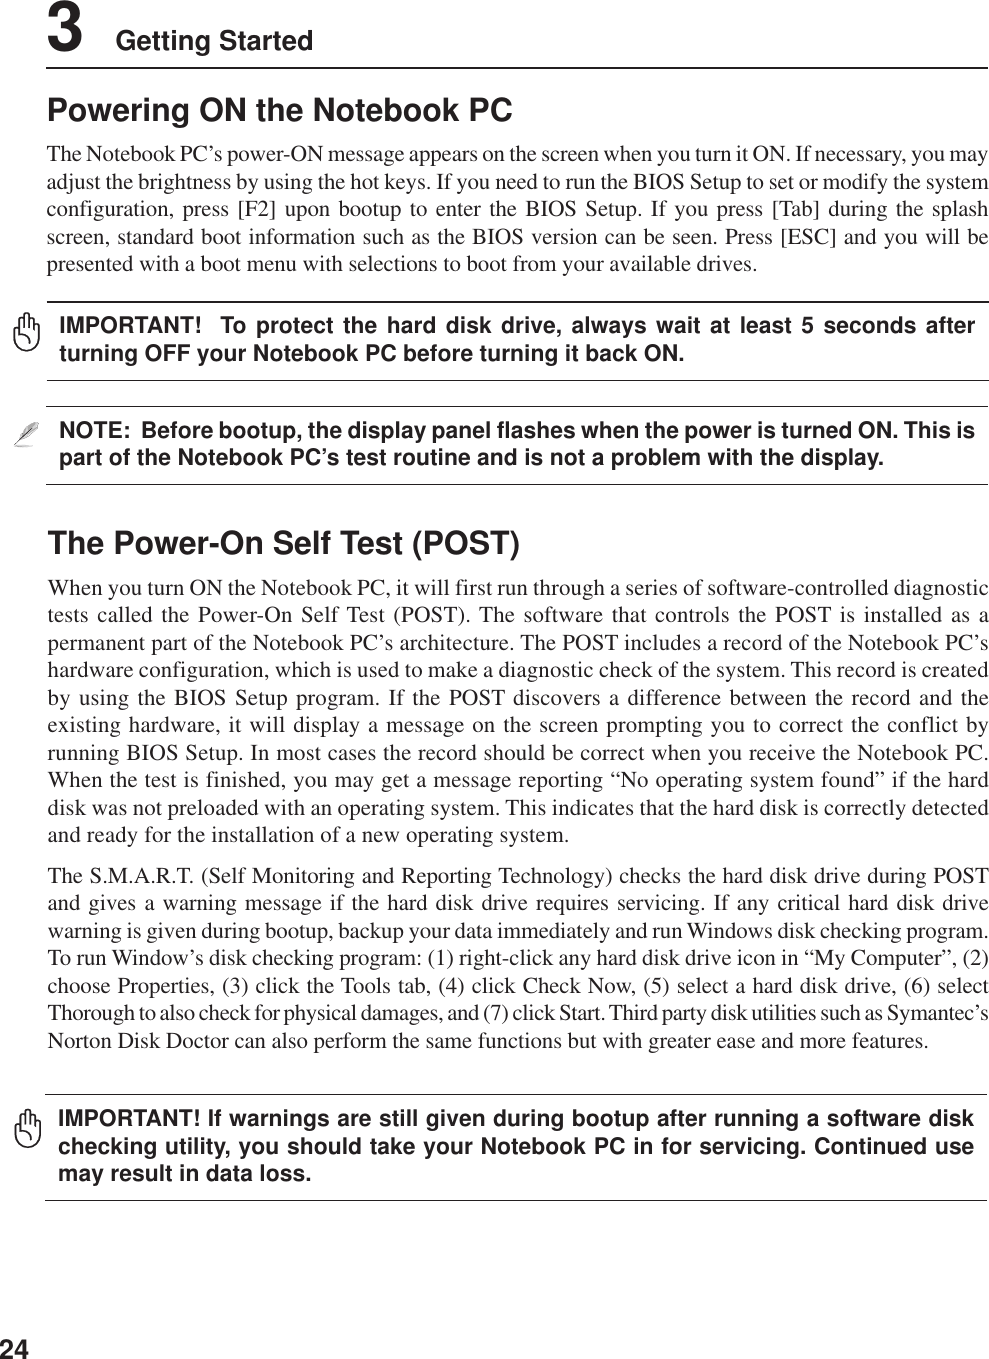 243    Getting StartedThe Power-On Self Test (POST)When you turn ON the Notebook PC, it will first run through a series of software-controlled diagnostictests called the Power-On Self Test (POST). The software that controls the POST is installed as apermanent part of the Notebook PC’s architecture. The POST includes a record of the Notebook PC’shardware configuration, which is used to make a diagnostic check of the system. This record is createdby using the BIOS Setup program. If the POST discovers a difference between the record and theexisting hardware, it will display a message on the screen prompting you to correct the conflict byrunning BIOS Setup. In most cases the record should be correct when you receive the Notebook PC.When the test is finished, you may get a message reporting “No operating system found” if the harddisk was not preloaded with an operating system. This indicates that the hard disk is correctly detectedand ready for the installation of a new operating system.The S.M.A.R.T. (Self Monitoring and Reporting Technology) checks the hard disk drive during POSTand gives a warning message if the hard disk drive requires servicing. If any critical hard disk drivewarning is given during bootup, backup your data immediately and run Windows disk checking program.To run Window’s disk checking program: (1) right-click any hard disk drive icon in “My Computer”, (2)choose Properties, (3) click the Tools tab, (4) click Check Now, (5) select a hard disk drive, (6) selectThorough to also check for physical damages, and (7) click Start. Third party disk utilities such as Symantec’sNorton Disk Doctor can also perform the same functions but with greater ease and more features.Powering ON the Notebook PCThe Notebook PC’s power-ON message appears on the screen when you turn it ON. If necessary, you mayadjust the brightness by using the hot keys. If you need to run the BIOS Setup to set or modify the systemconfiguration, press [F2] upon bootup to enter the BIOS Setup. If you press [Tab] during the splashscreen, standard boot information such as the BIOS version can be seen. Press [ESC] and you will bepresented with a boot menu with selections to boot from your available drives.NOTE:  Before bootup, the display panel flashes when the power is turned ON. This ispart of the Notebook PC’s test routine and is not a problem with the display.IMPORTANT! If warnings are still given during bootup after running a software diskchecking utility, you should take your Notebook PC in for servicing. Continued usemay result in data loss.IMPORTANT!  To protect the hard disk drive, always wait at least 5 seconds afterturning OFF your Notebook PC before turning it back ON.